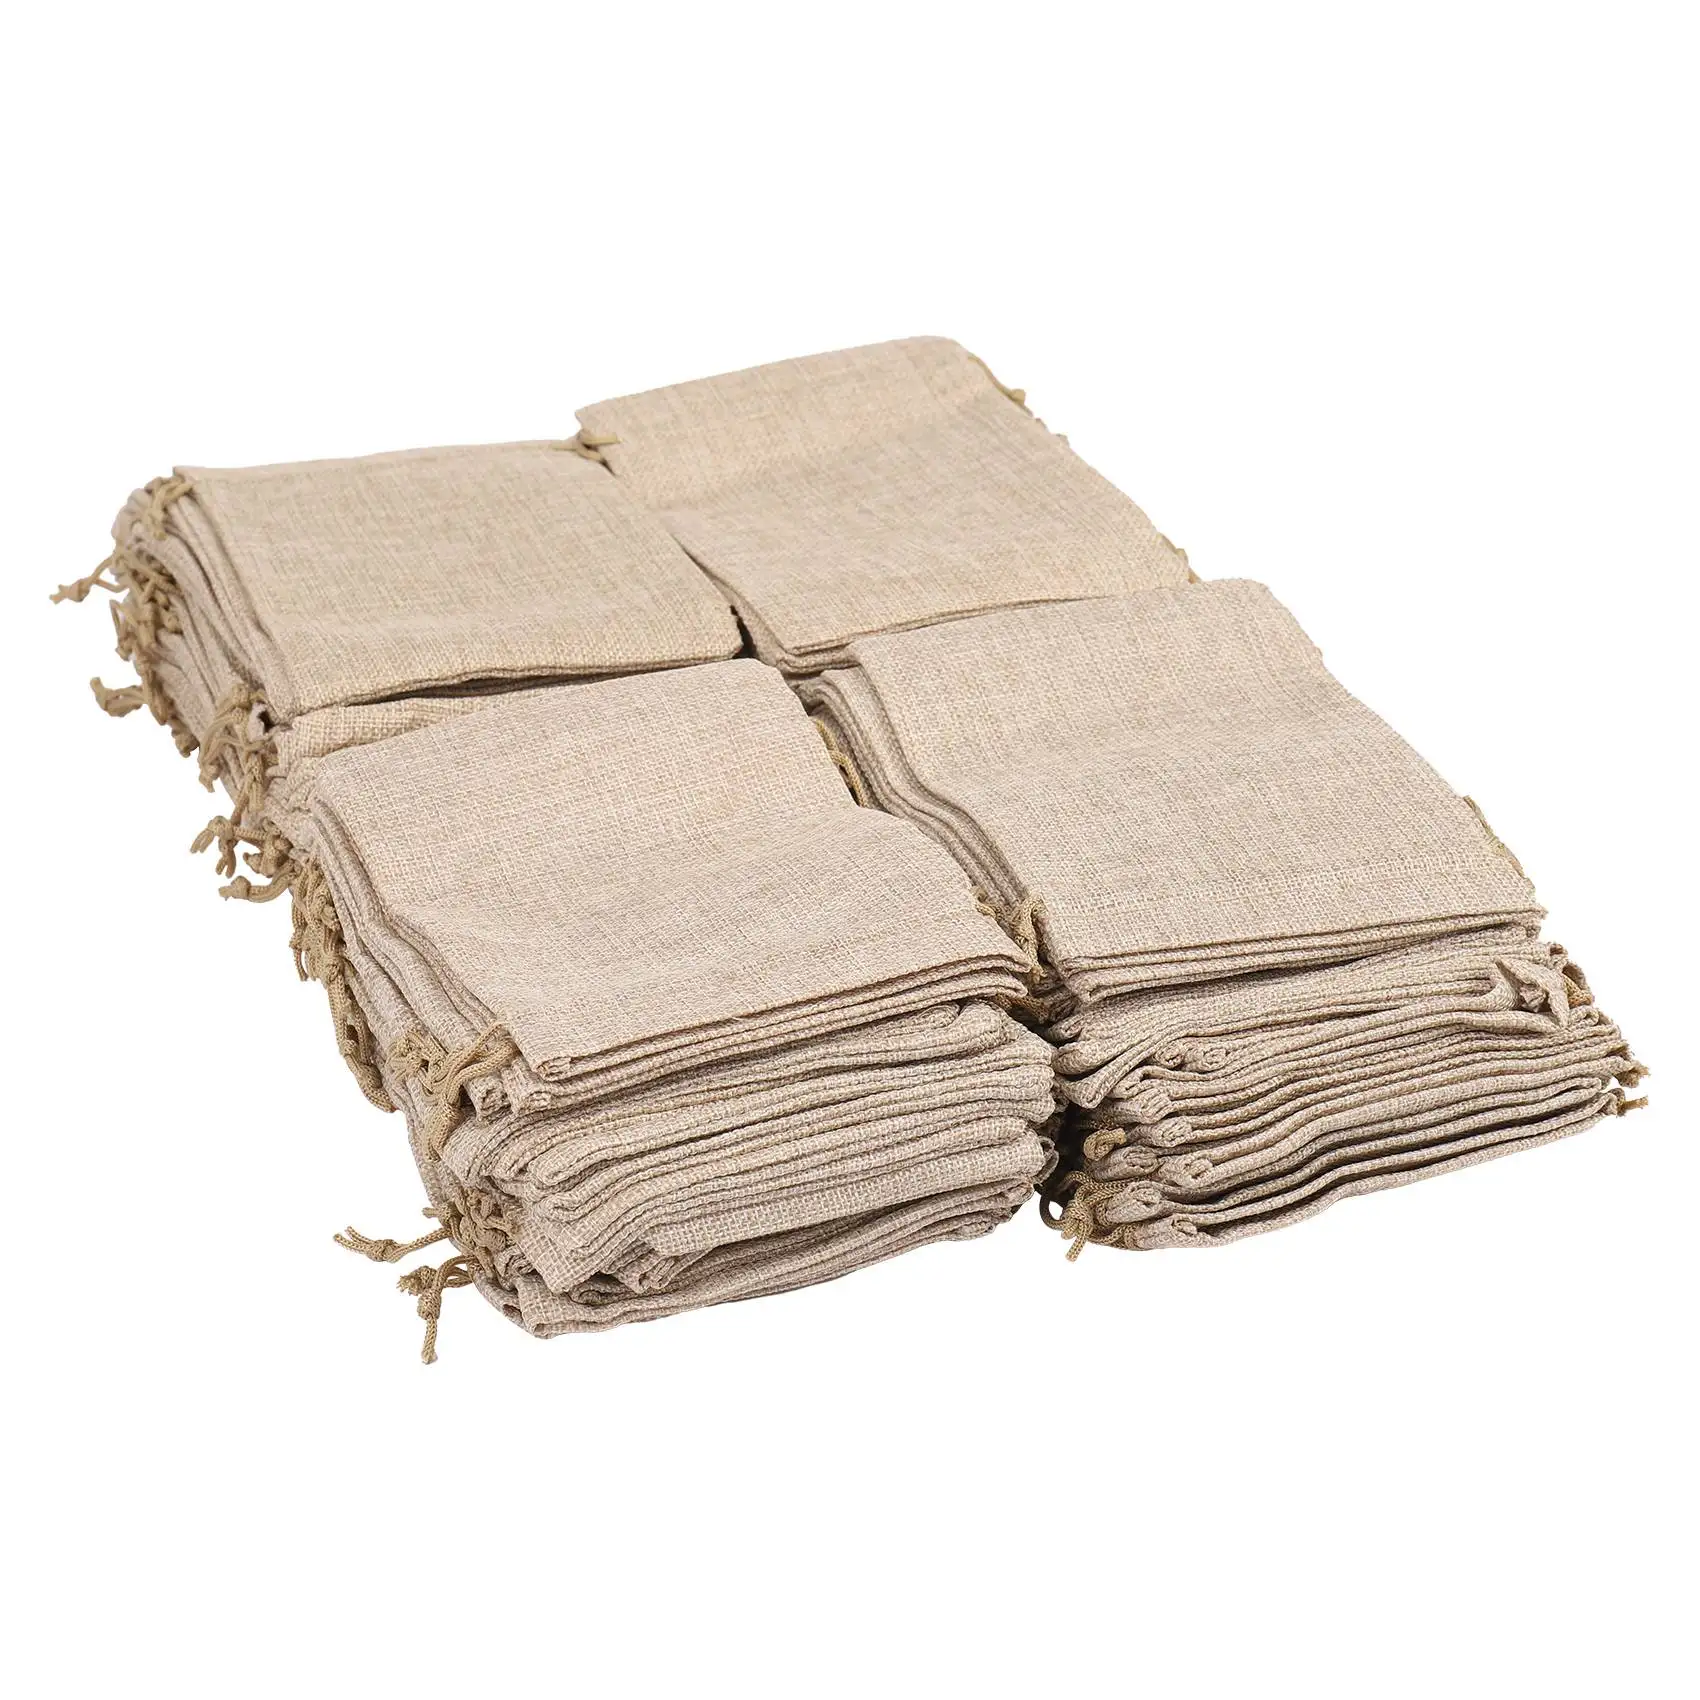 

100pcs Burlap Packing Pouches Drawstring Bags 13x18cm Gift Bag Jute Packing Storage Linen Jewelry Pouches Sacks for Wedding P